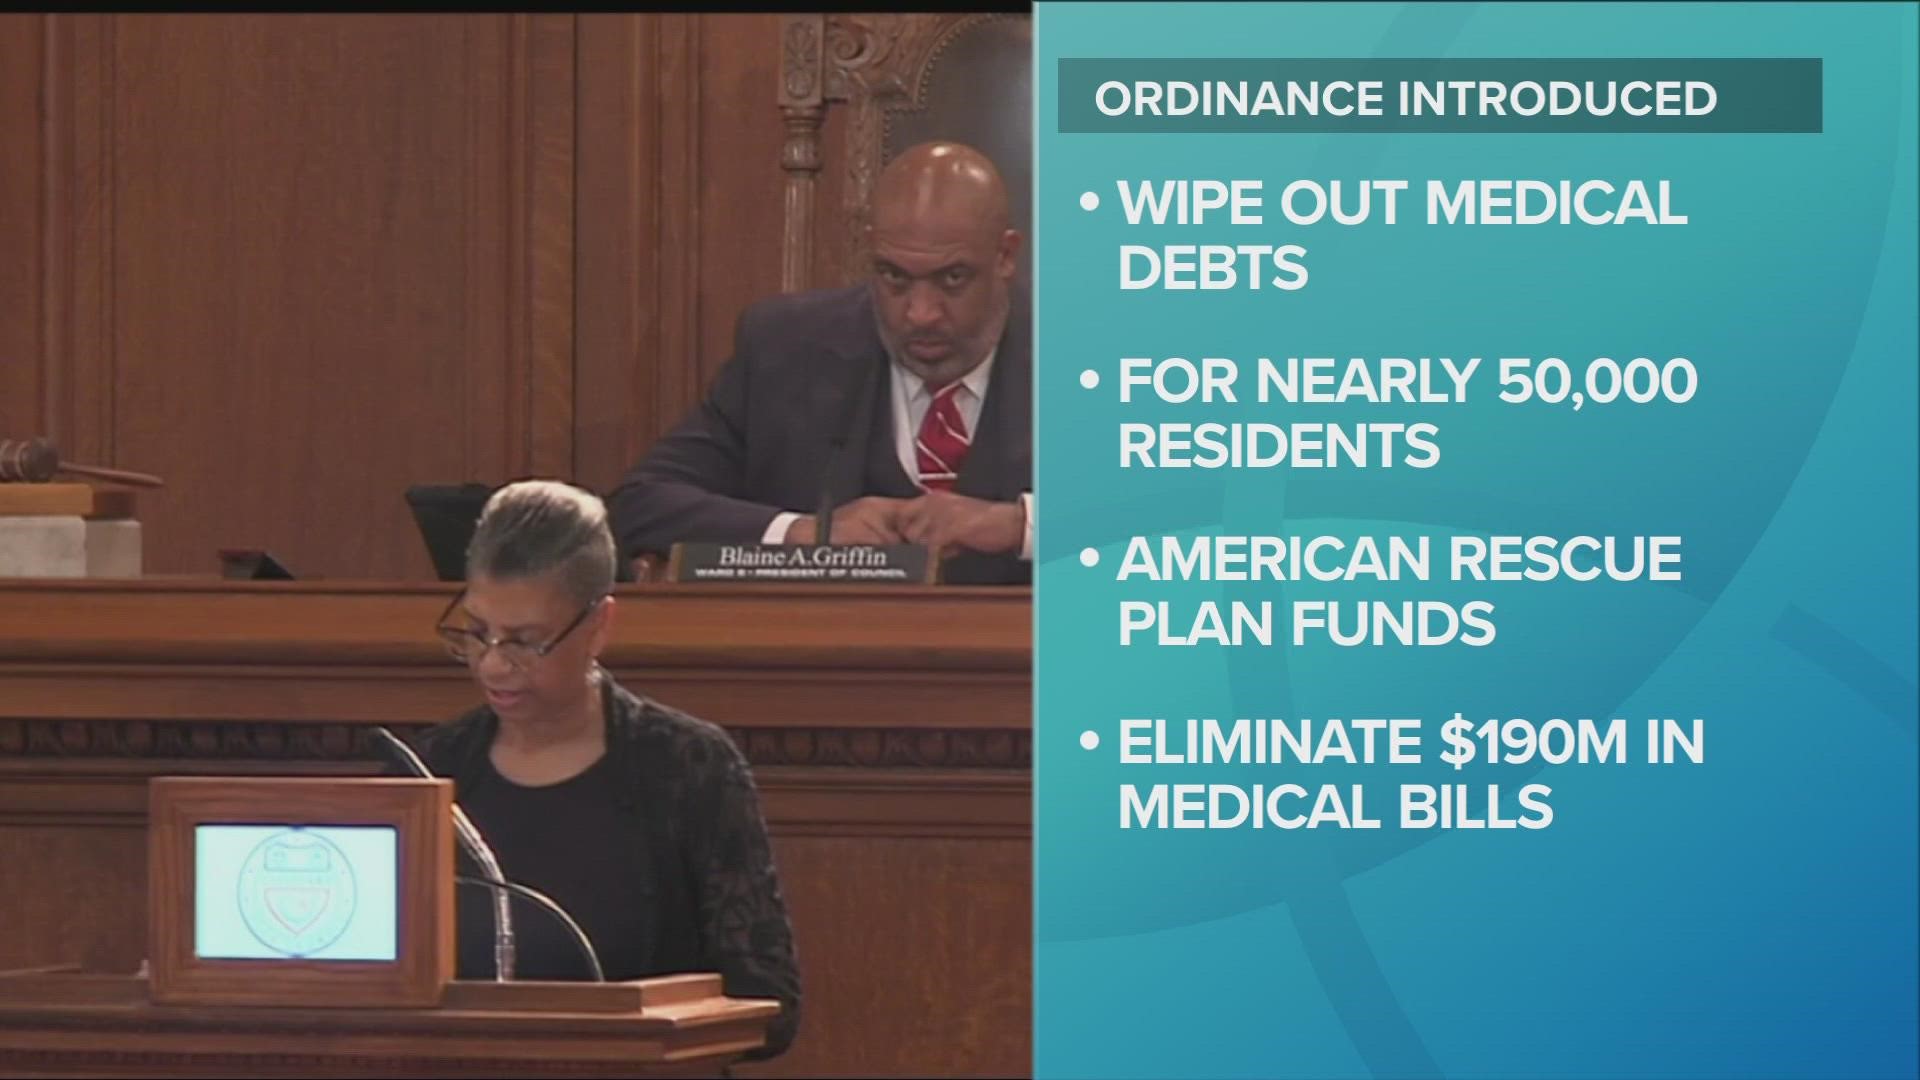 Council introduced legislation Monday to use $1.9 million in American Rescue Plan Act funds to buy medical debt.